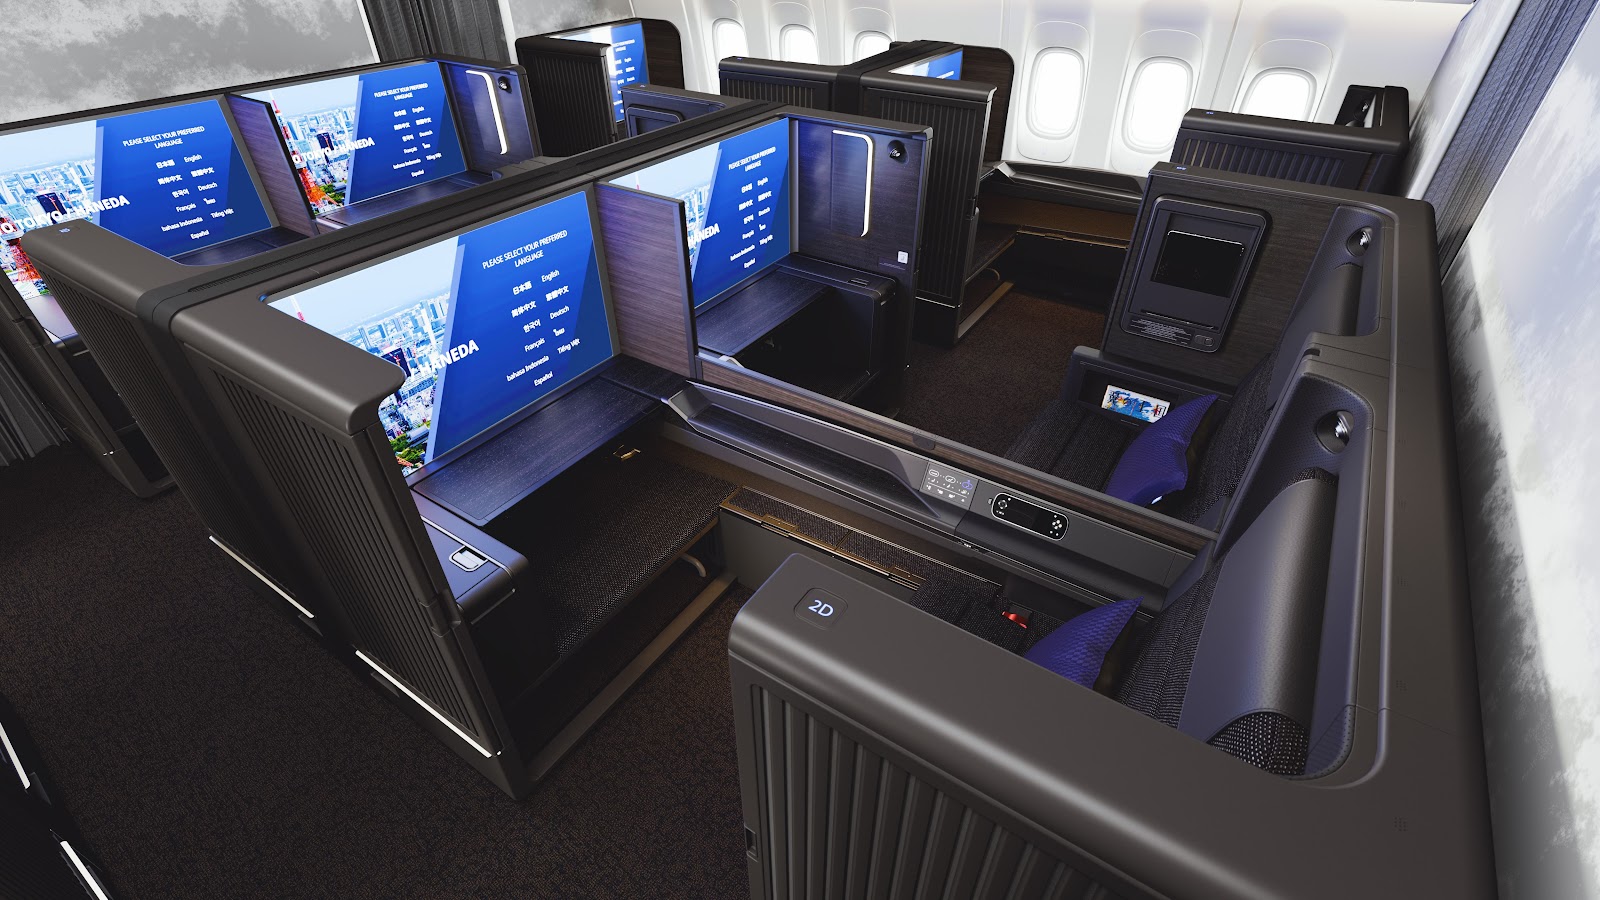 ANA First Class Suites on the Boeing 777-300ER.